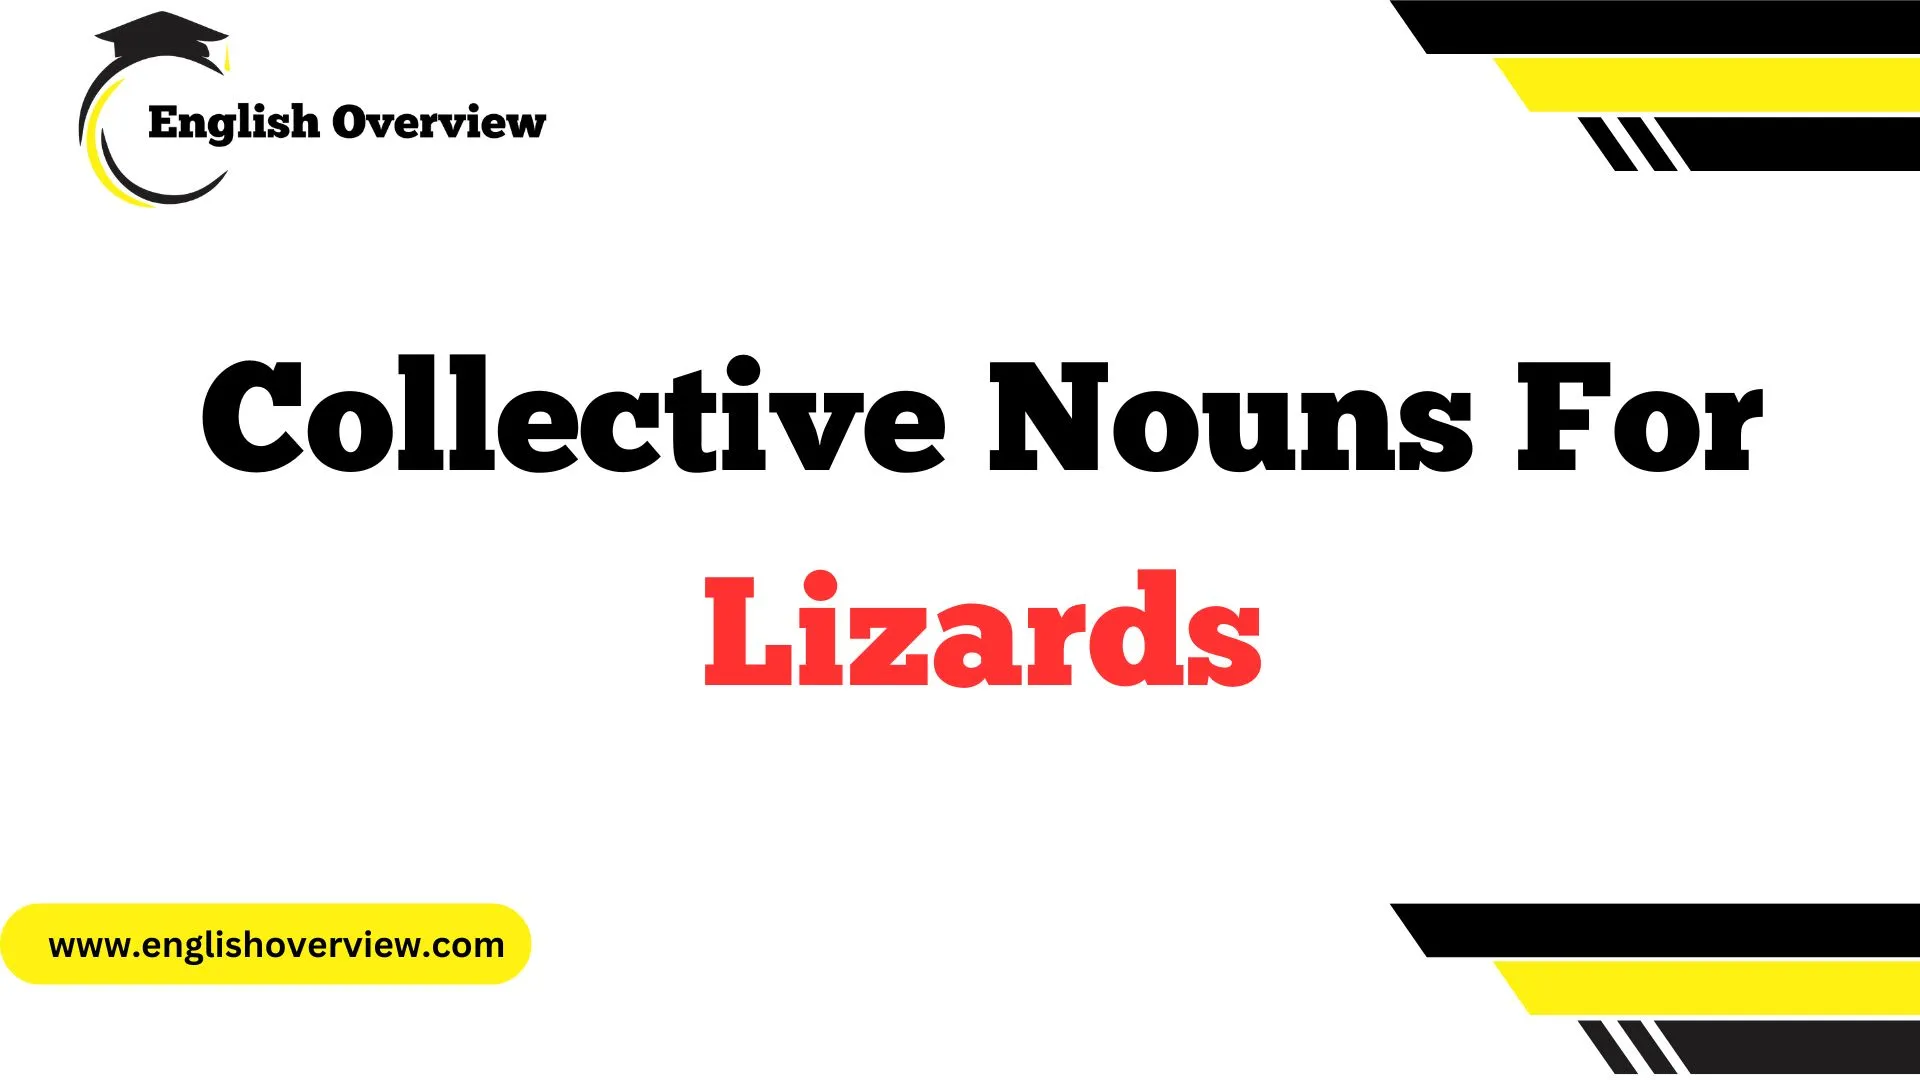 Collective Nouns For Lizards